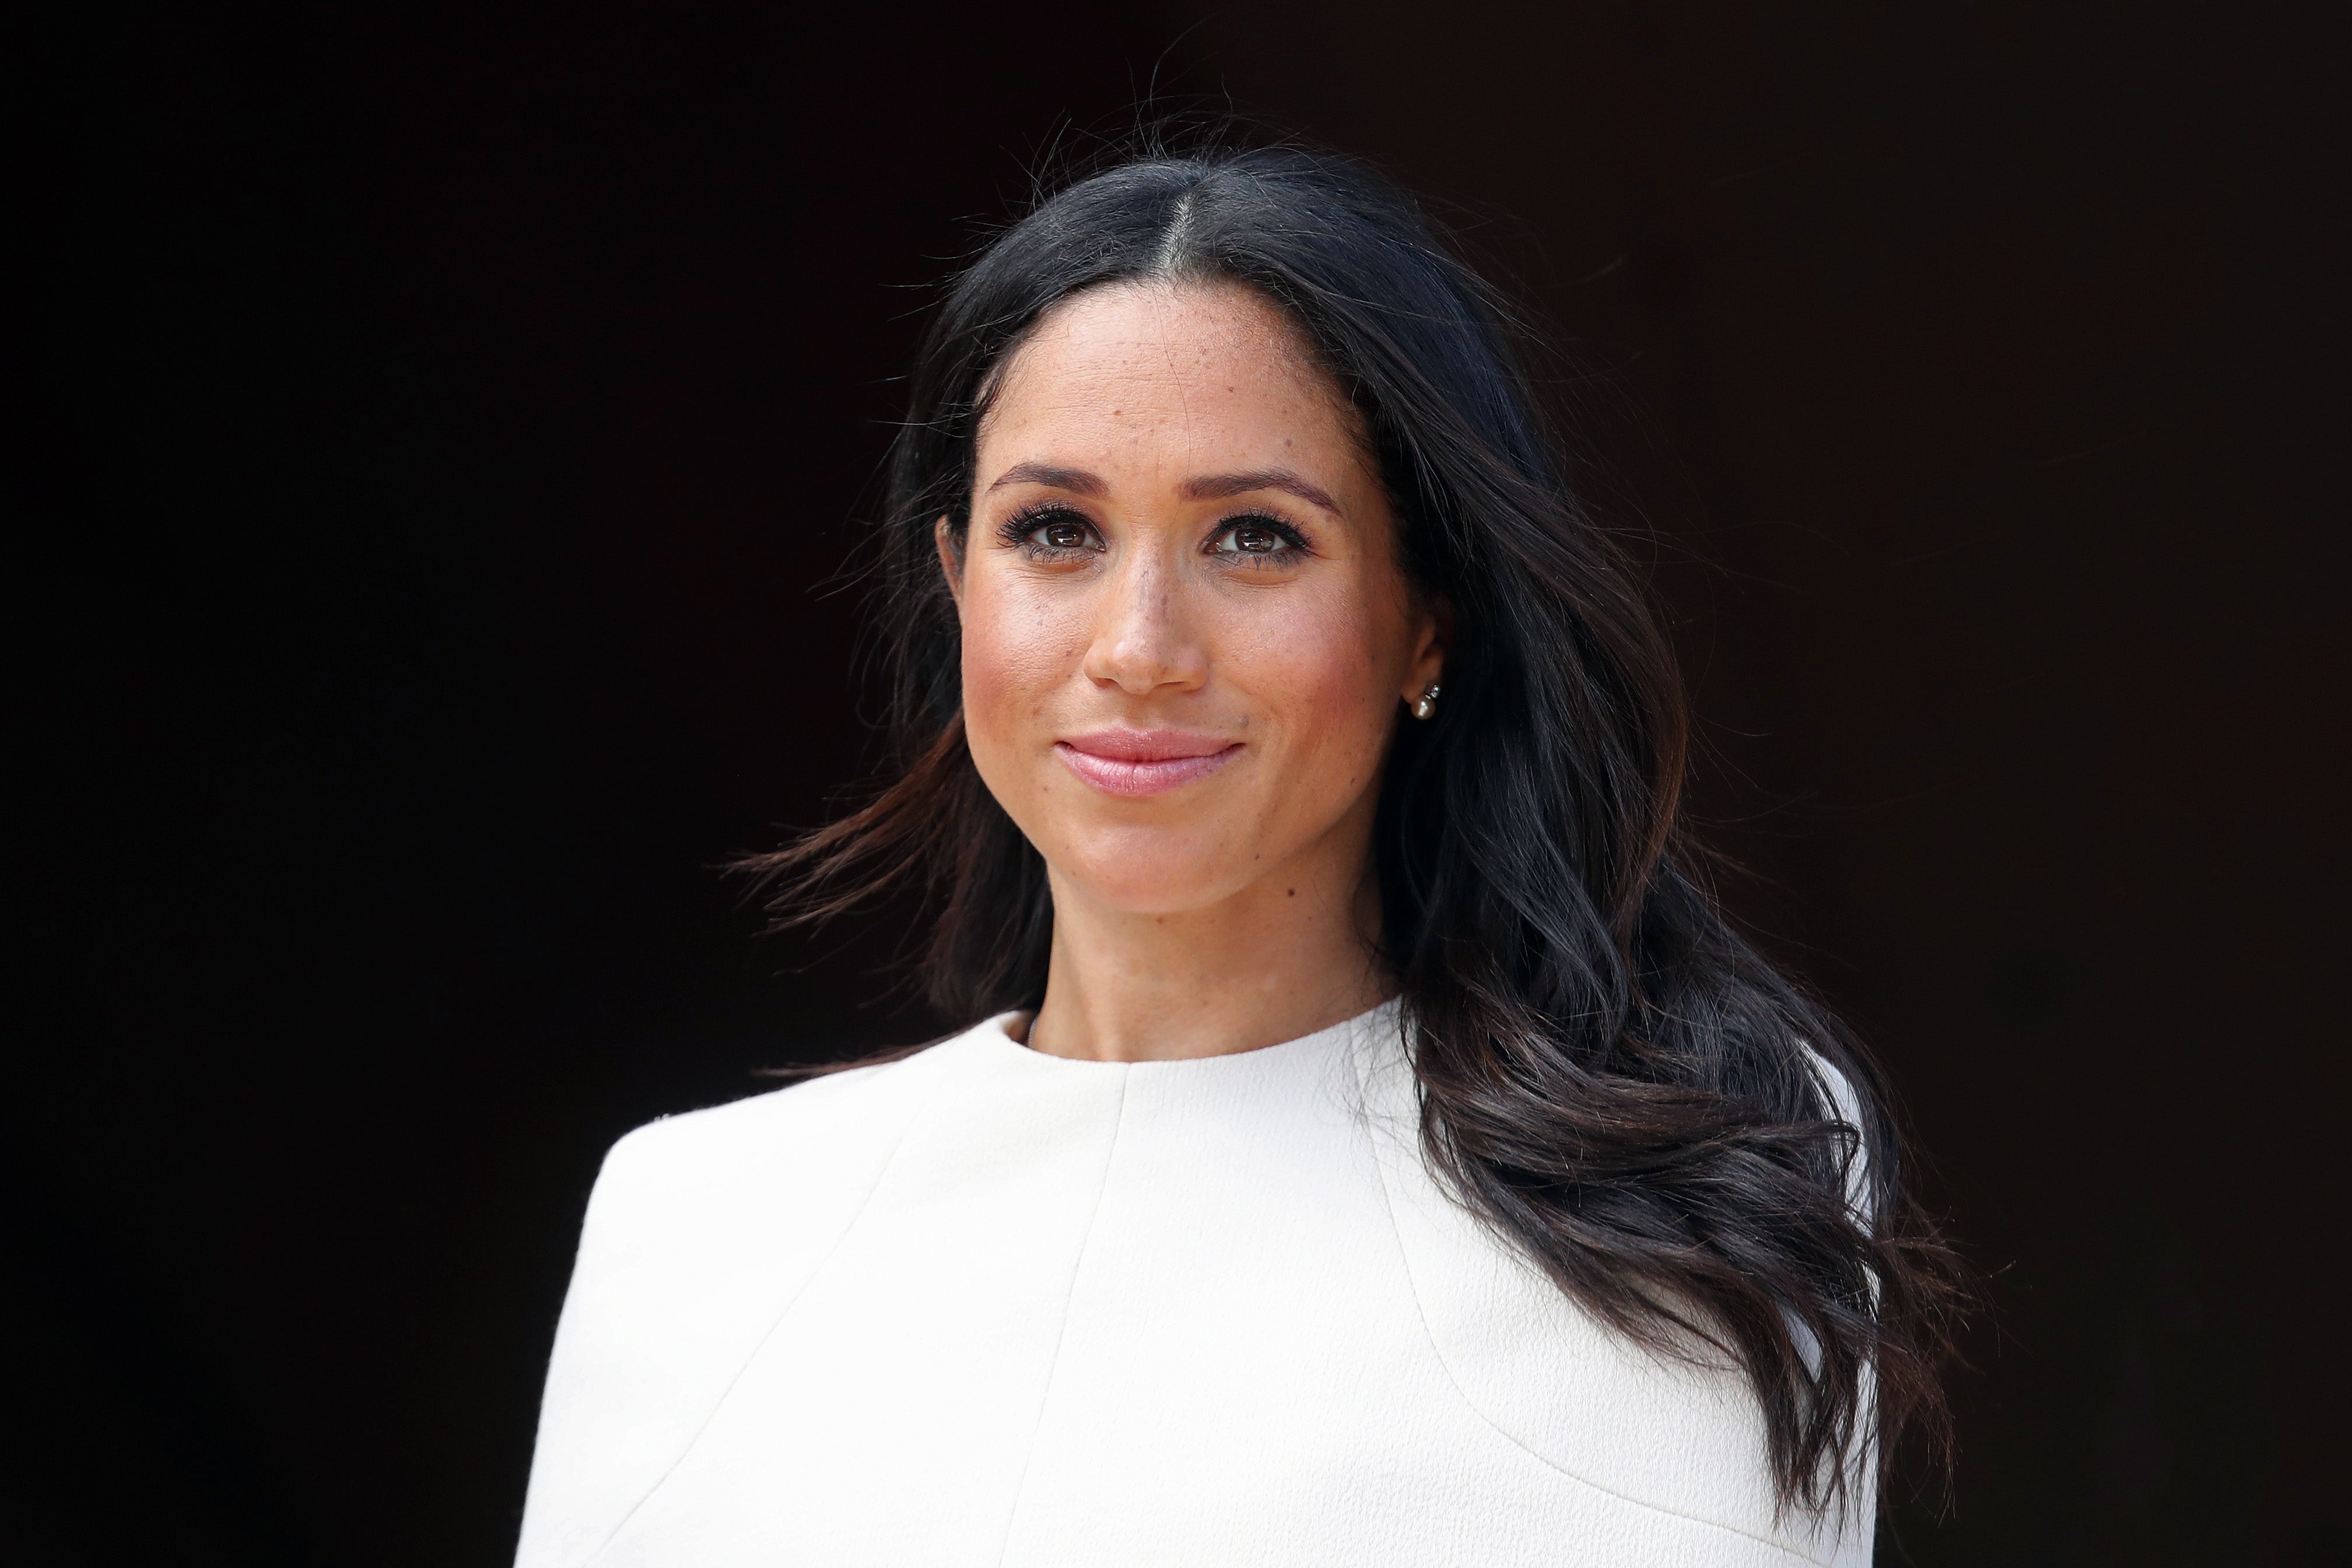 Who is who in Meghan Markle’s life?